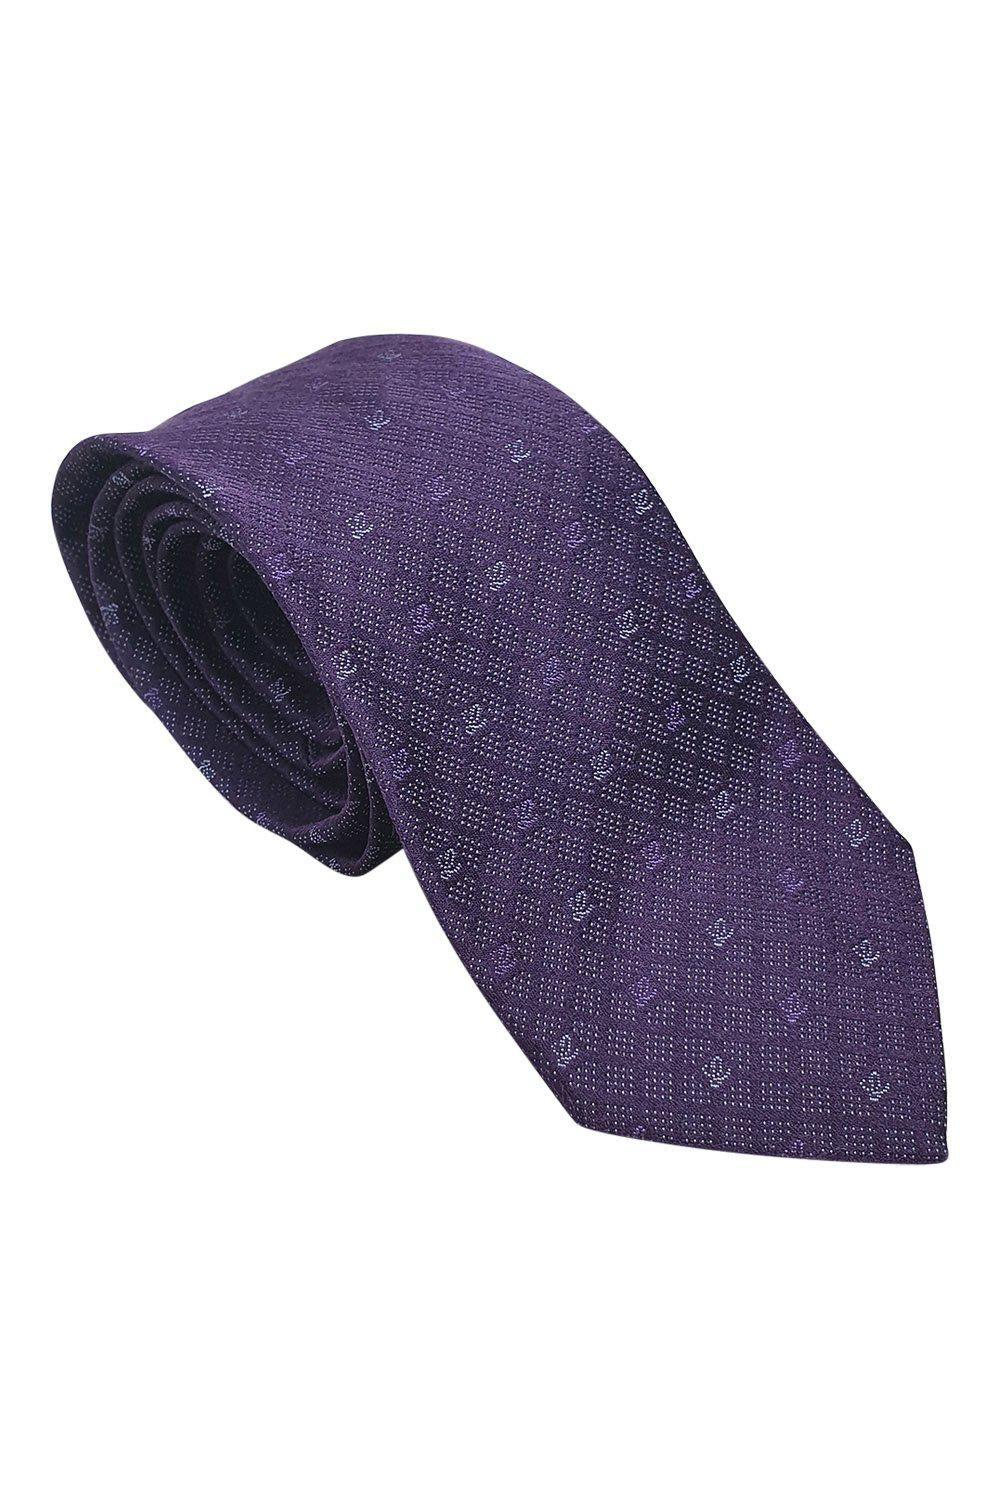 Copy of LOEWE 100% Silk Purple Tie Silver Polka Dot With Logo Repeat (60" L | 3.3" W)-The Freperie